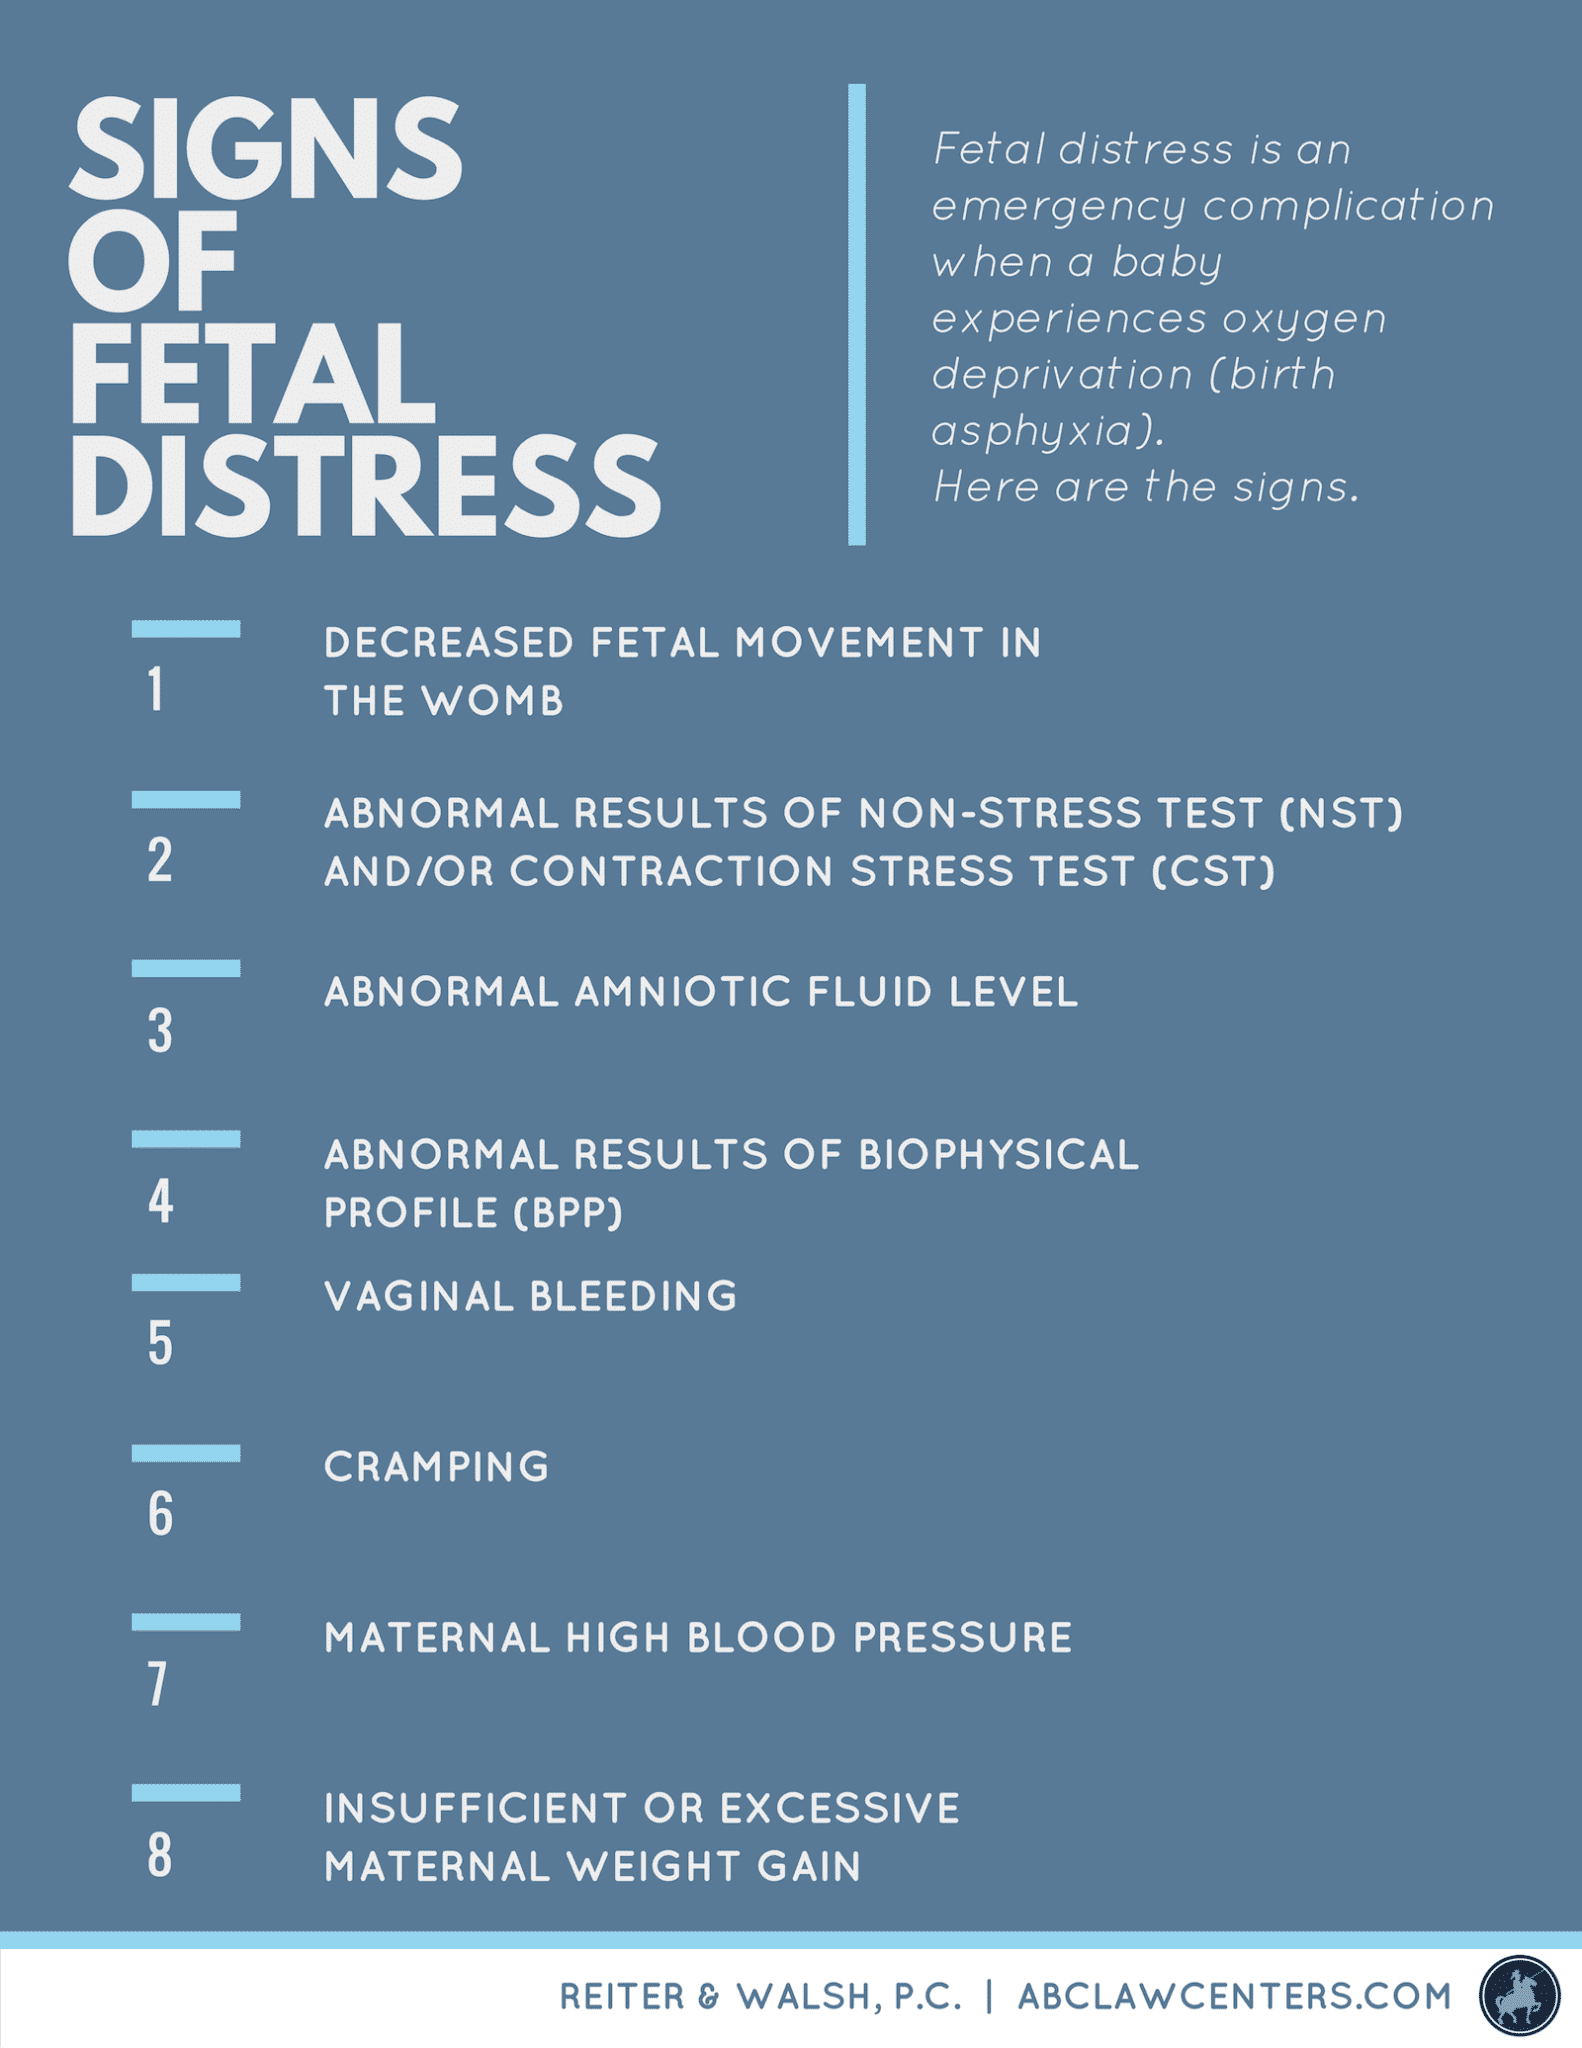 graphic that lists the Signs of Fetal Distress which are listed as 1. Decreased Fetal Movement in the Womb, 2. Abnormal Fetal Heart Rate 3. Abnormal Amniotic Fluid Level 4. Abnormal Results of Biophysical Profile (BPP) 5. Vaginal Bleeding 6. Cramping 7. Insufficient 8. Excessive Maternal Weight Gain